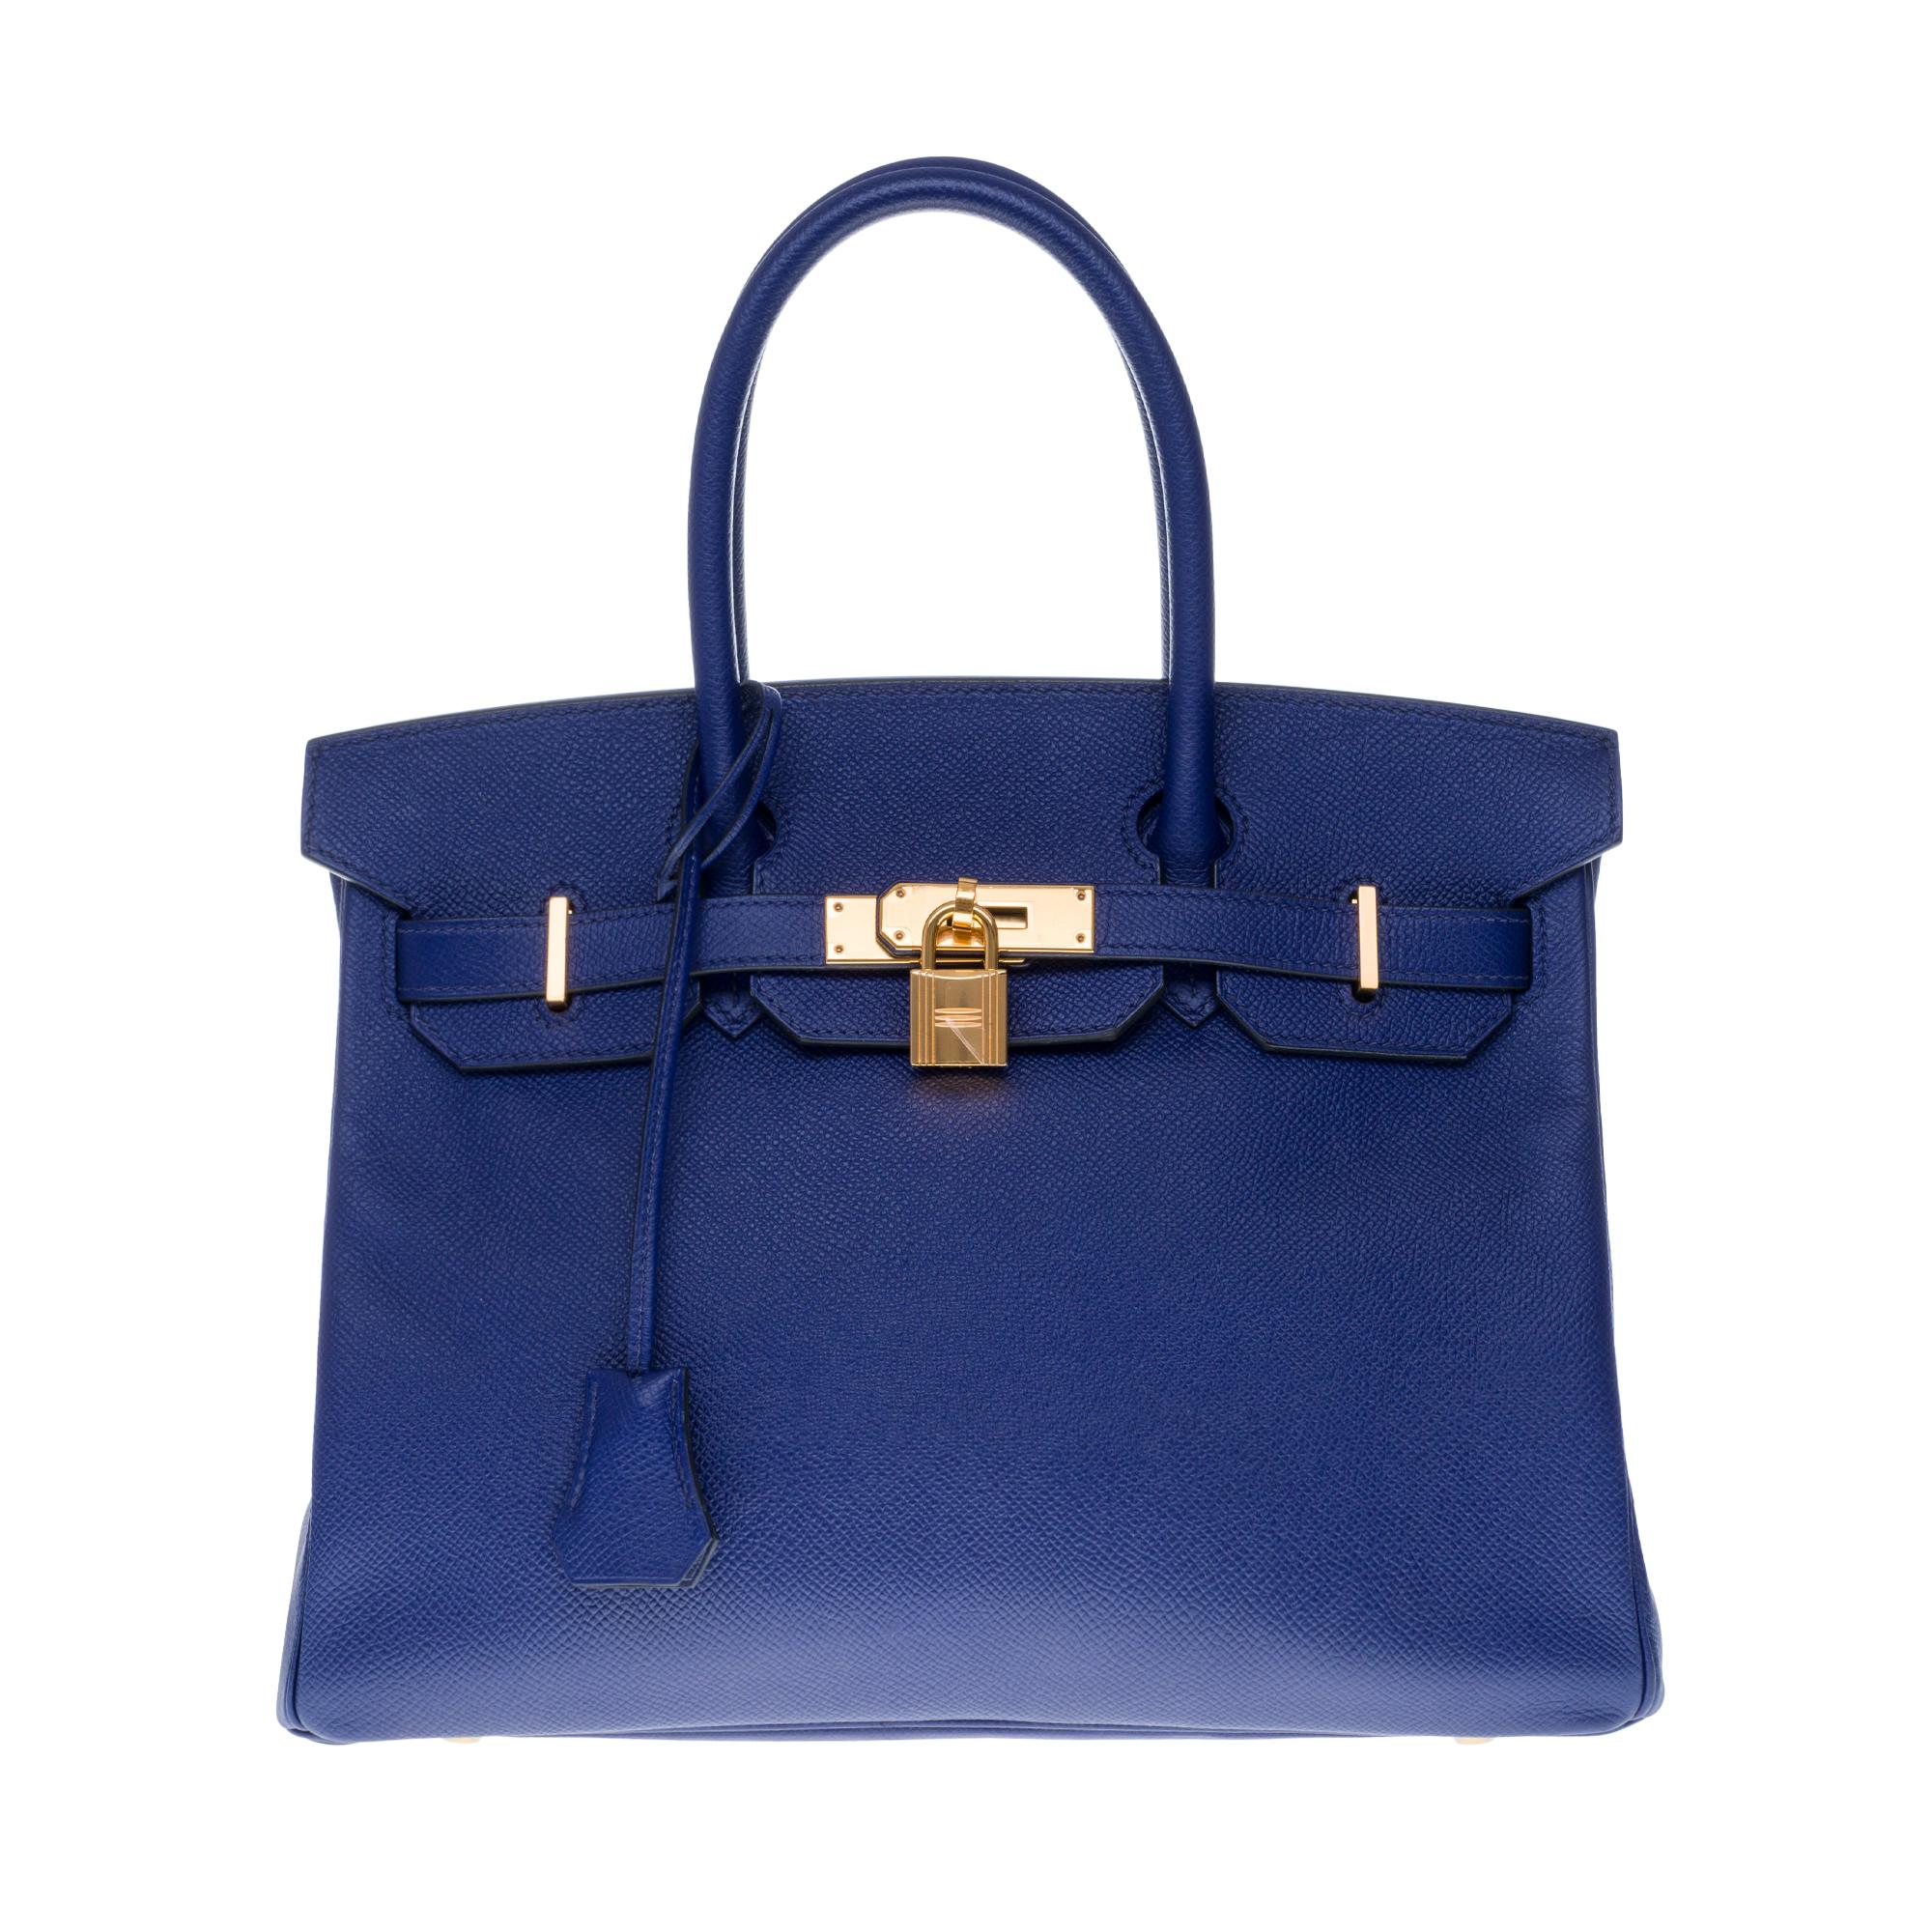 Beautiful Hermes Birkin 30 cm Blue Encre Epsom Leather Handbag with gold-plated metal hardware, double blue leather handle for a handheld.

Closure by flap.
Lining in blue leather, a zipped pocket, a patch pocket.
Signature: 